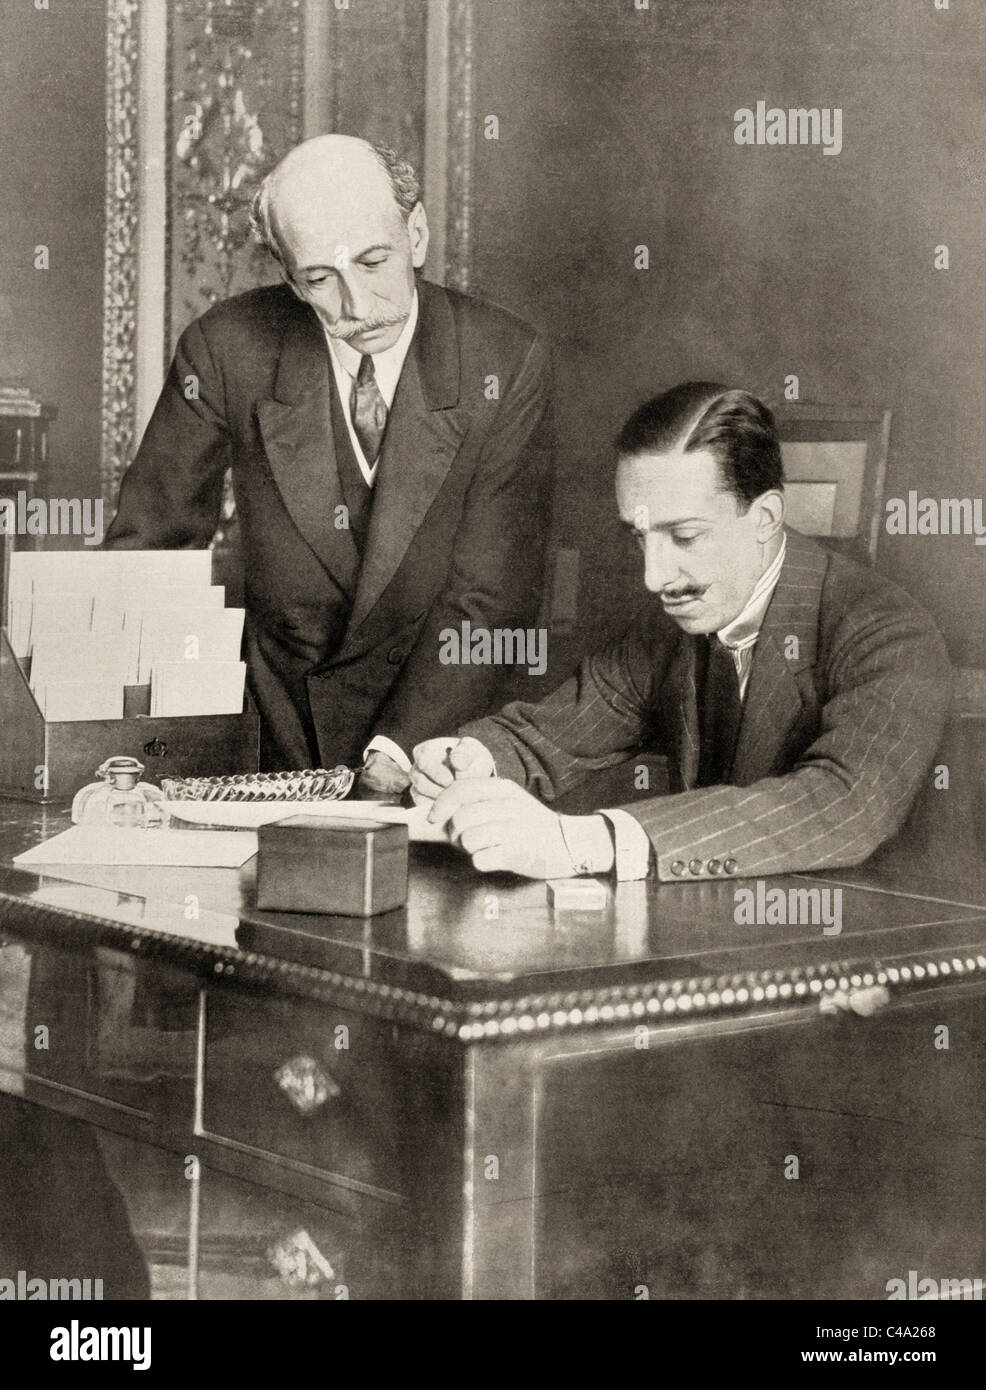 Alfonso XIII de Borbón, 1886 – 1941. King of Spain from his birth until the proclamation of the Second Republic in 1931.  Seen here with Eduardo Dato Iradier, Presidente del Consejo. Stock Photo